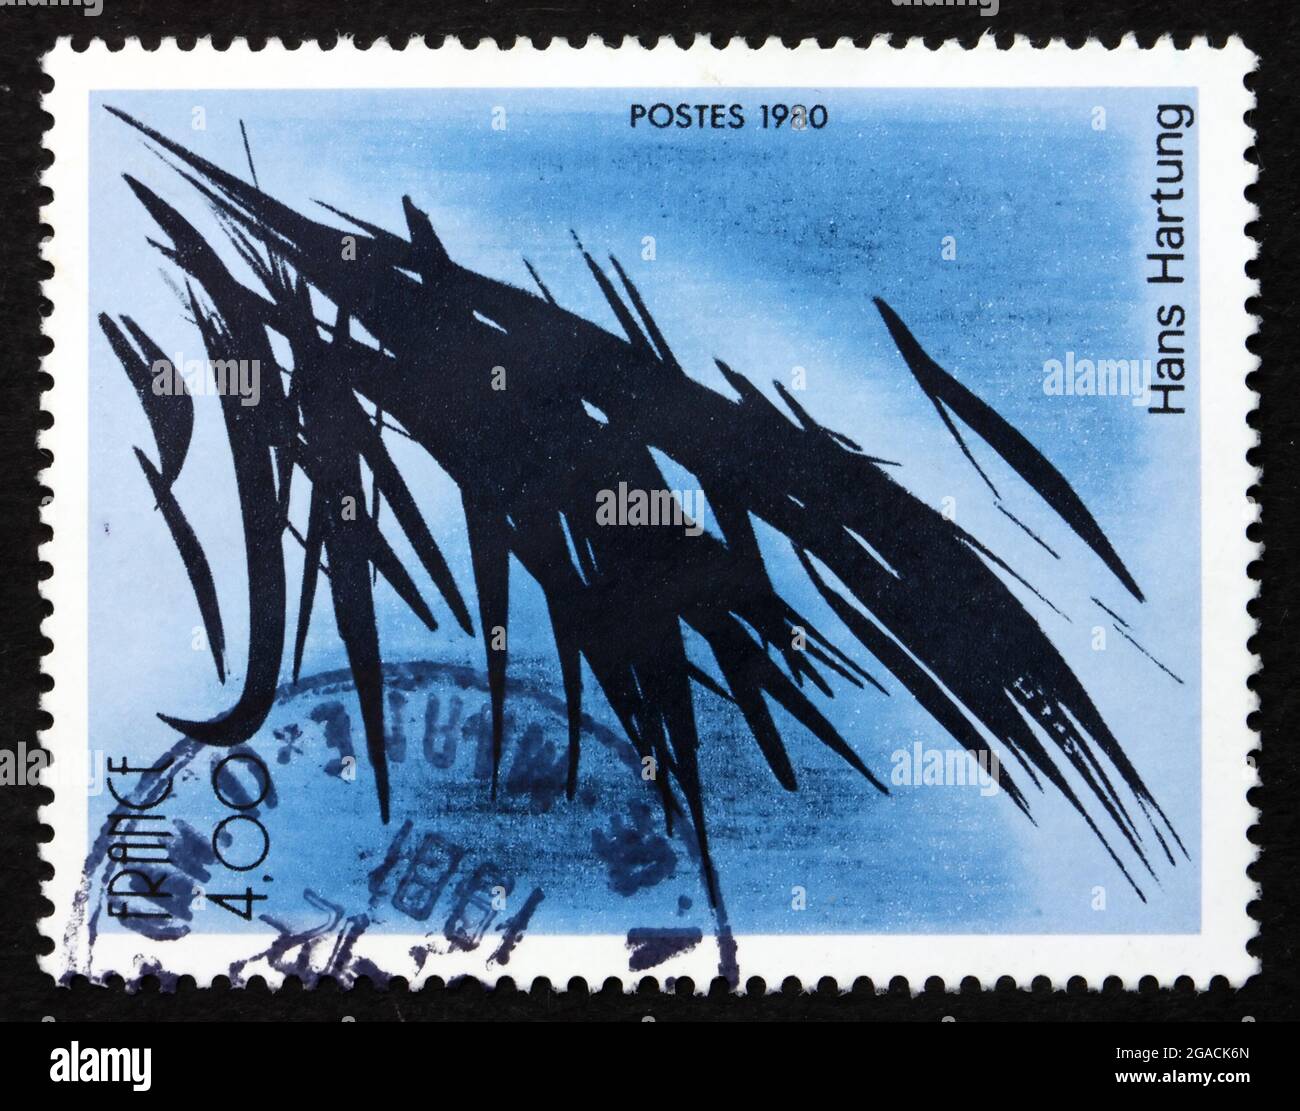 FRANCE - CIRCA 1980: a stamp printed in the France shows Abstract, Painting by Hans Hartung, circa 1980 Stock Photo